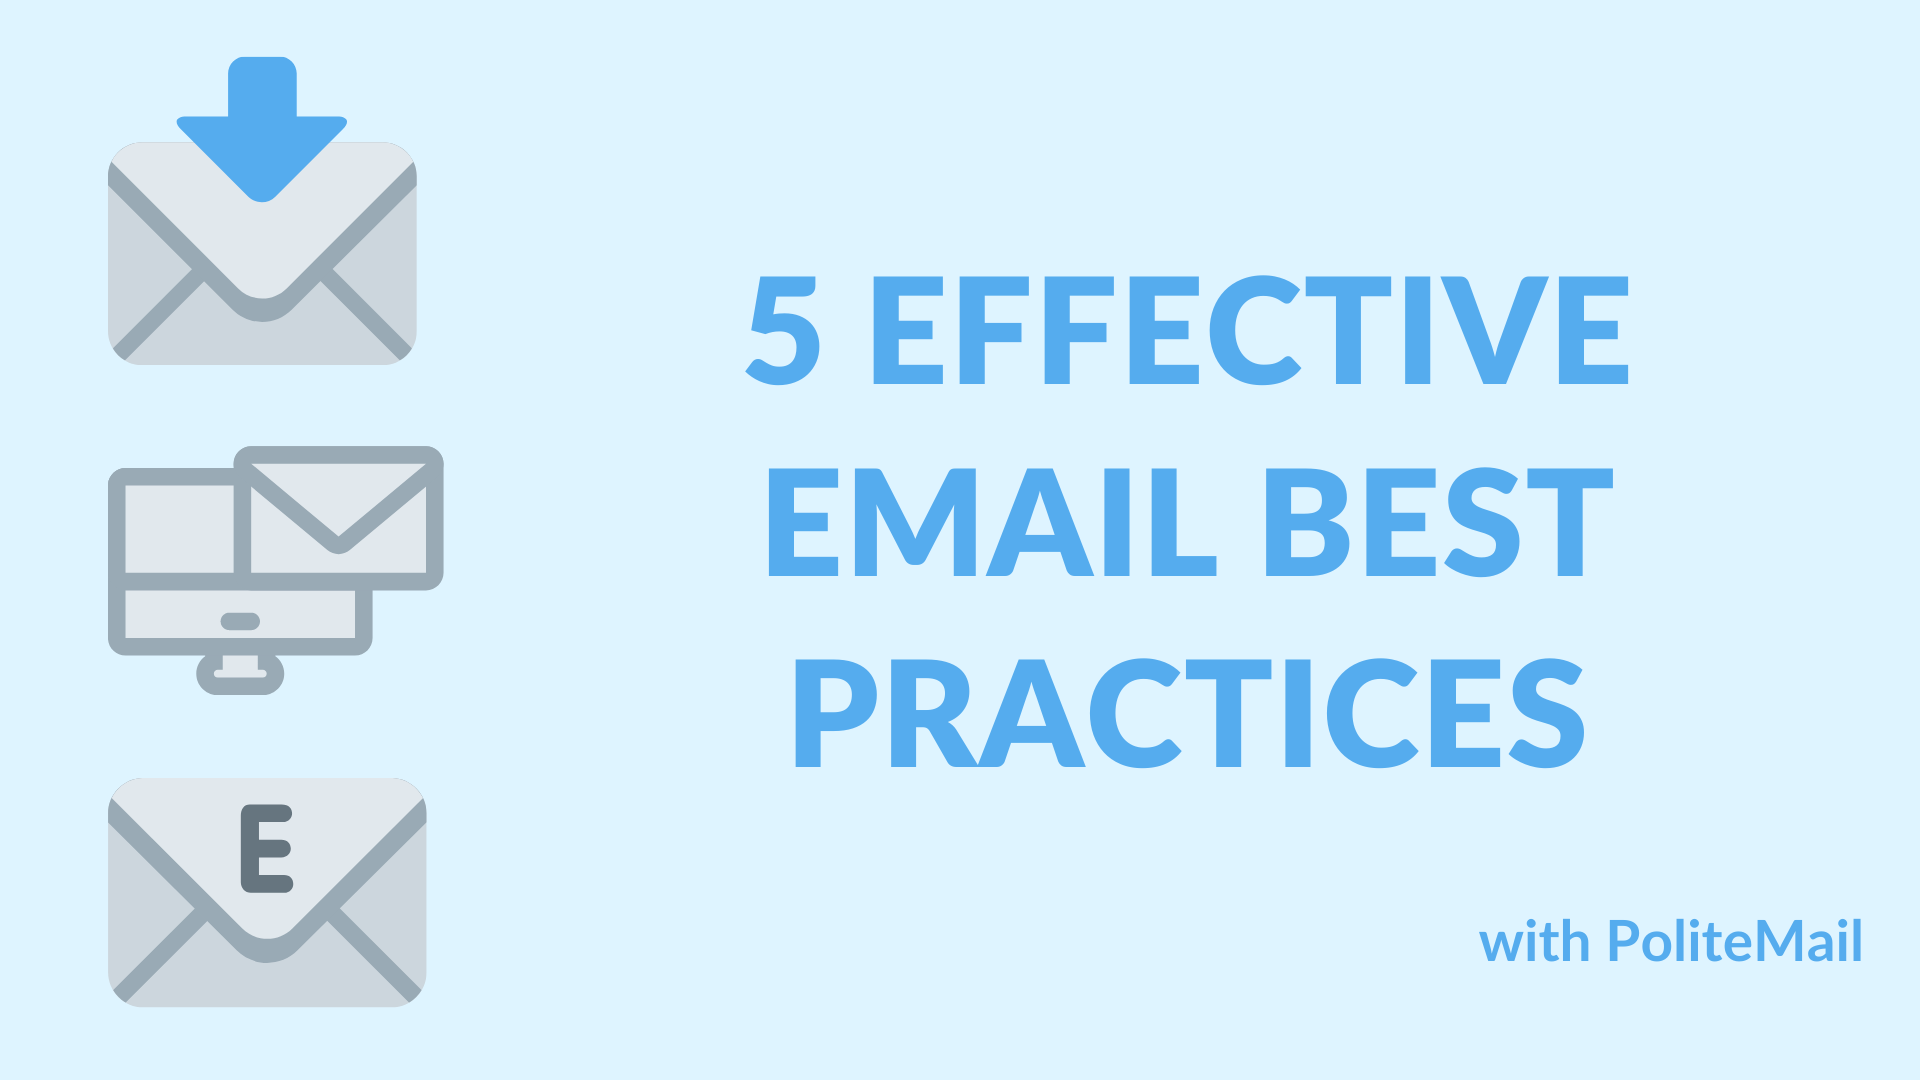 5 Effective Email Best Practices